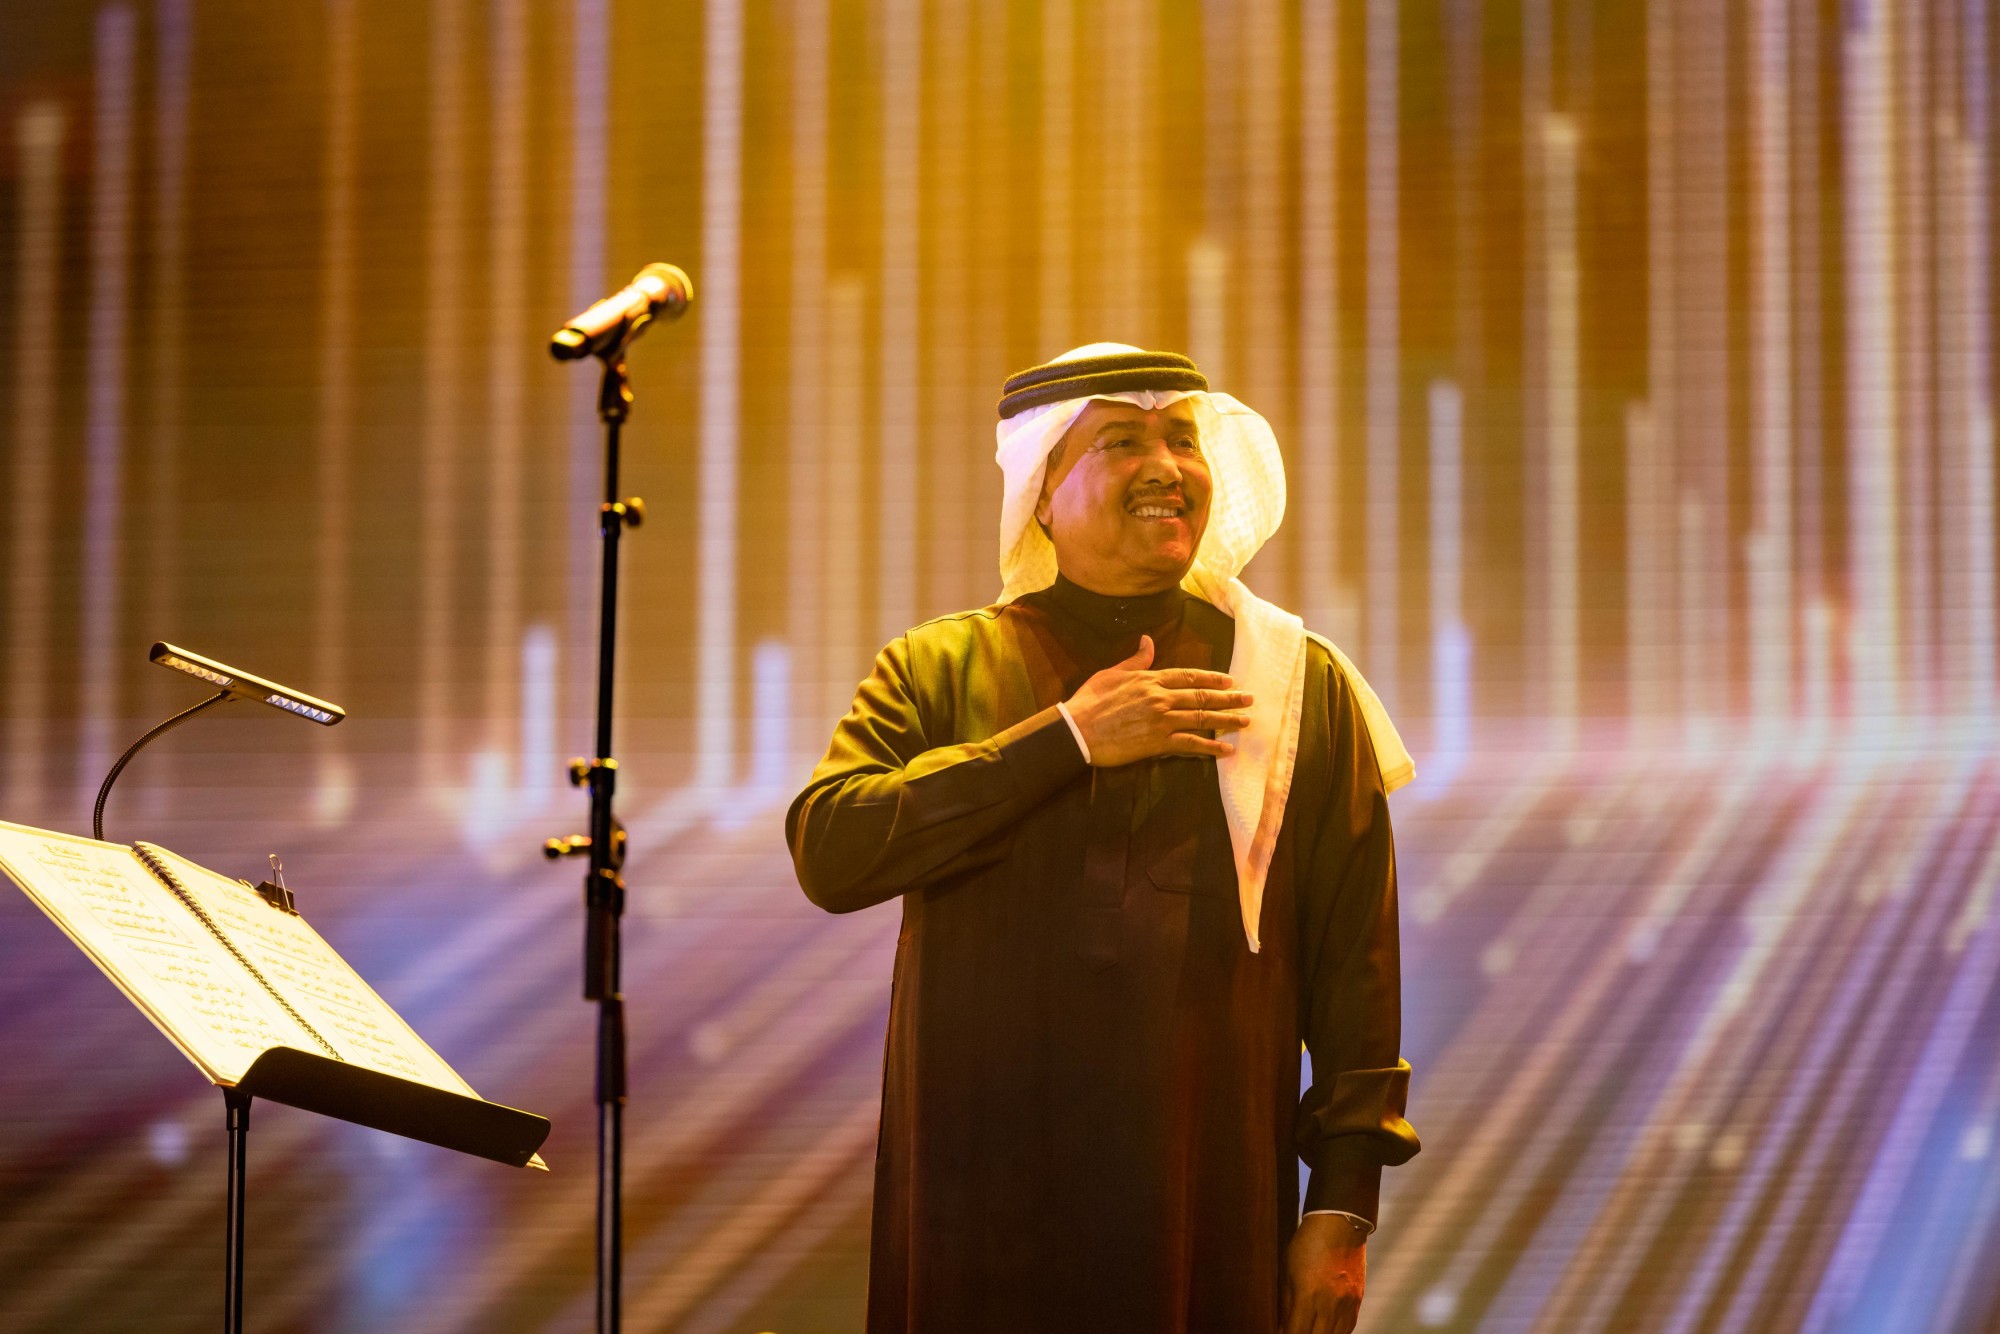 Mohammed Abdo performs at Jubilee Stage during the Kingdom of Saudi Arabia National Day m30562